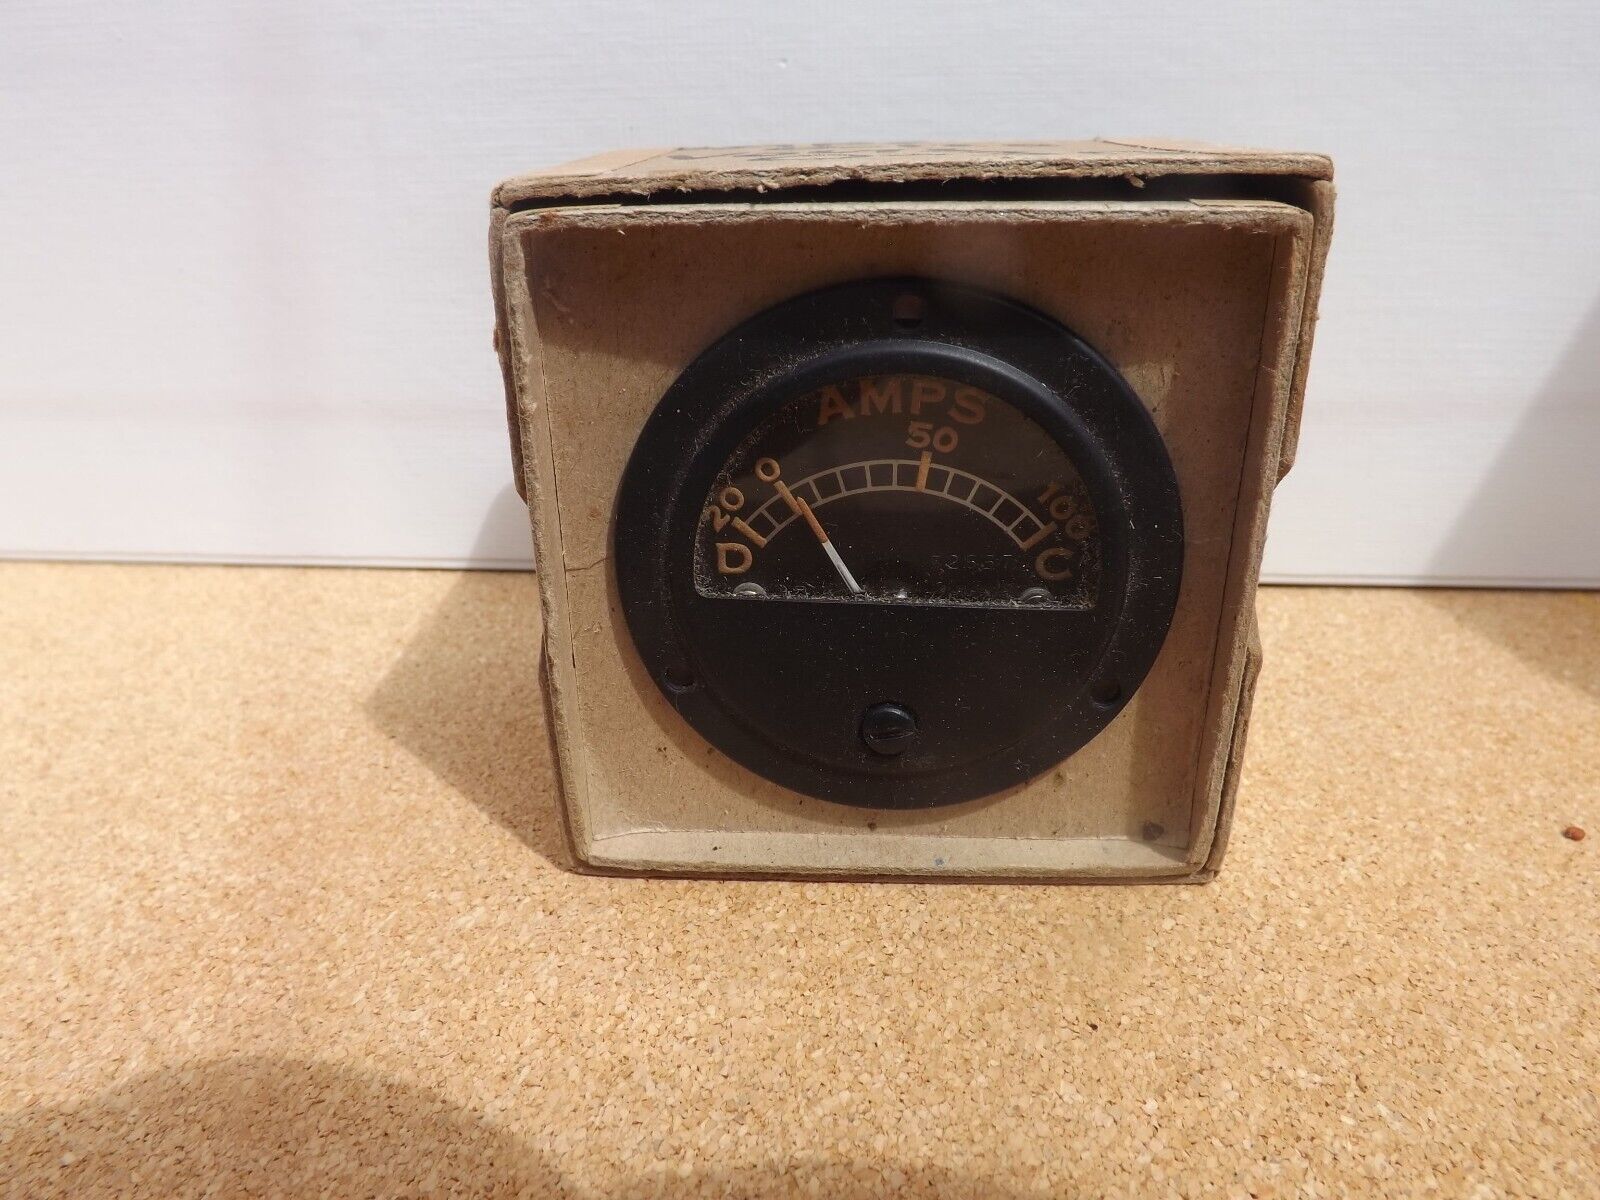 WWII Aircraft Type D2 Ammeter Gauge, Hickok Electrical, 20-0-100 Amperes, In Box